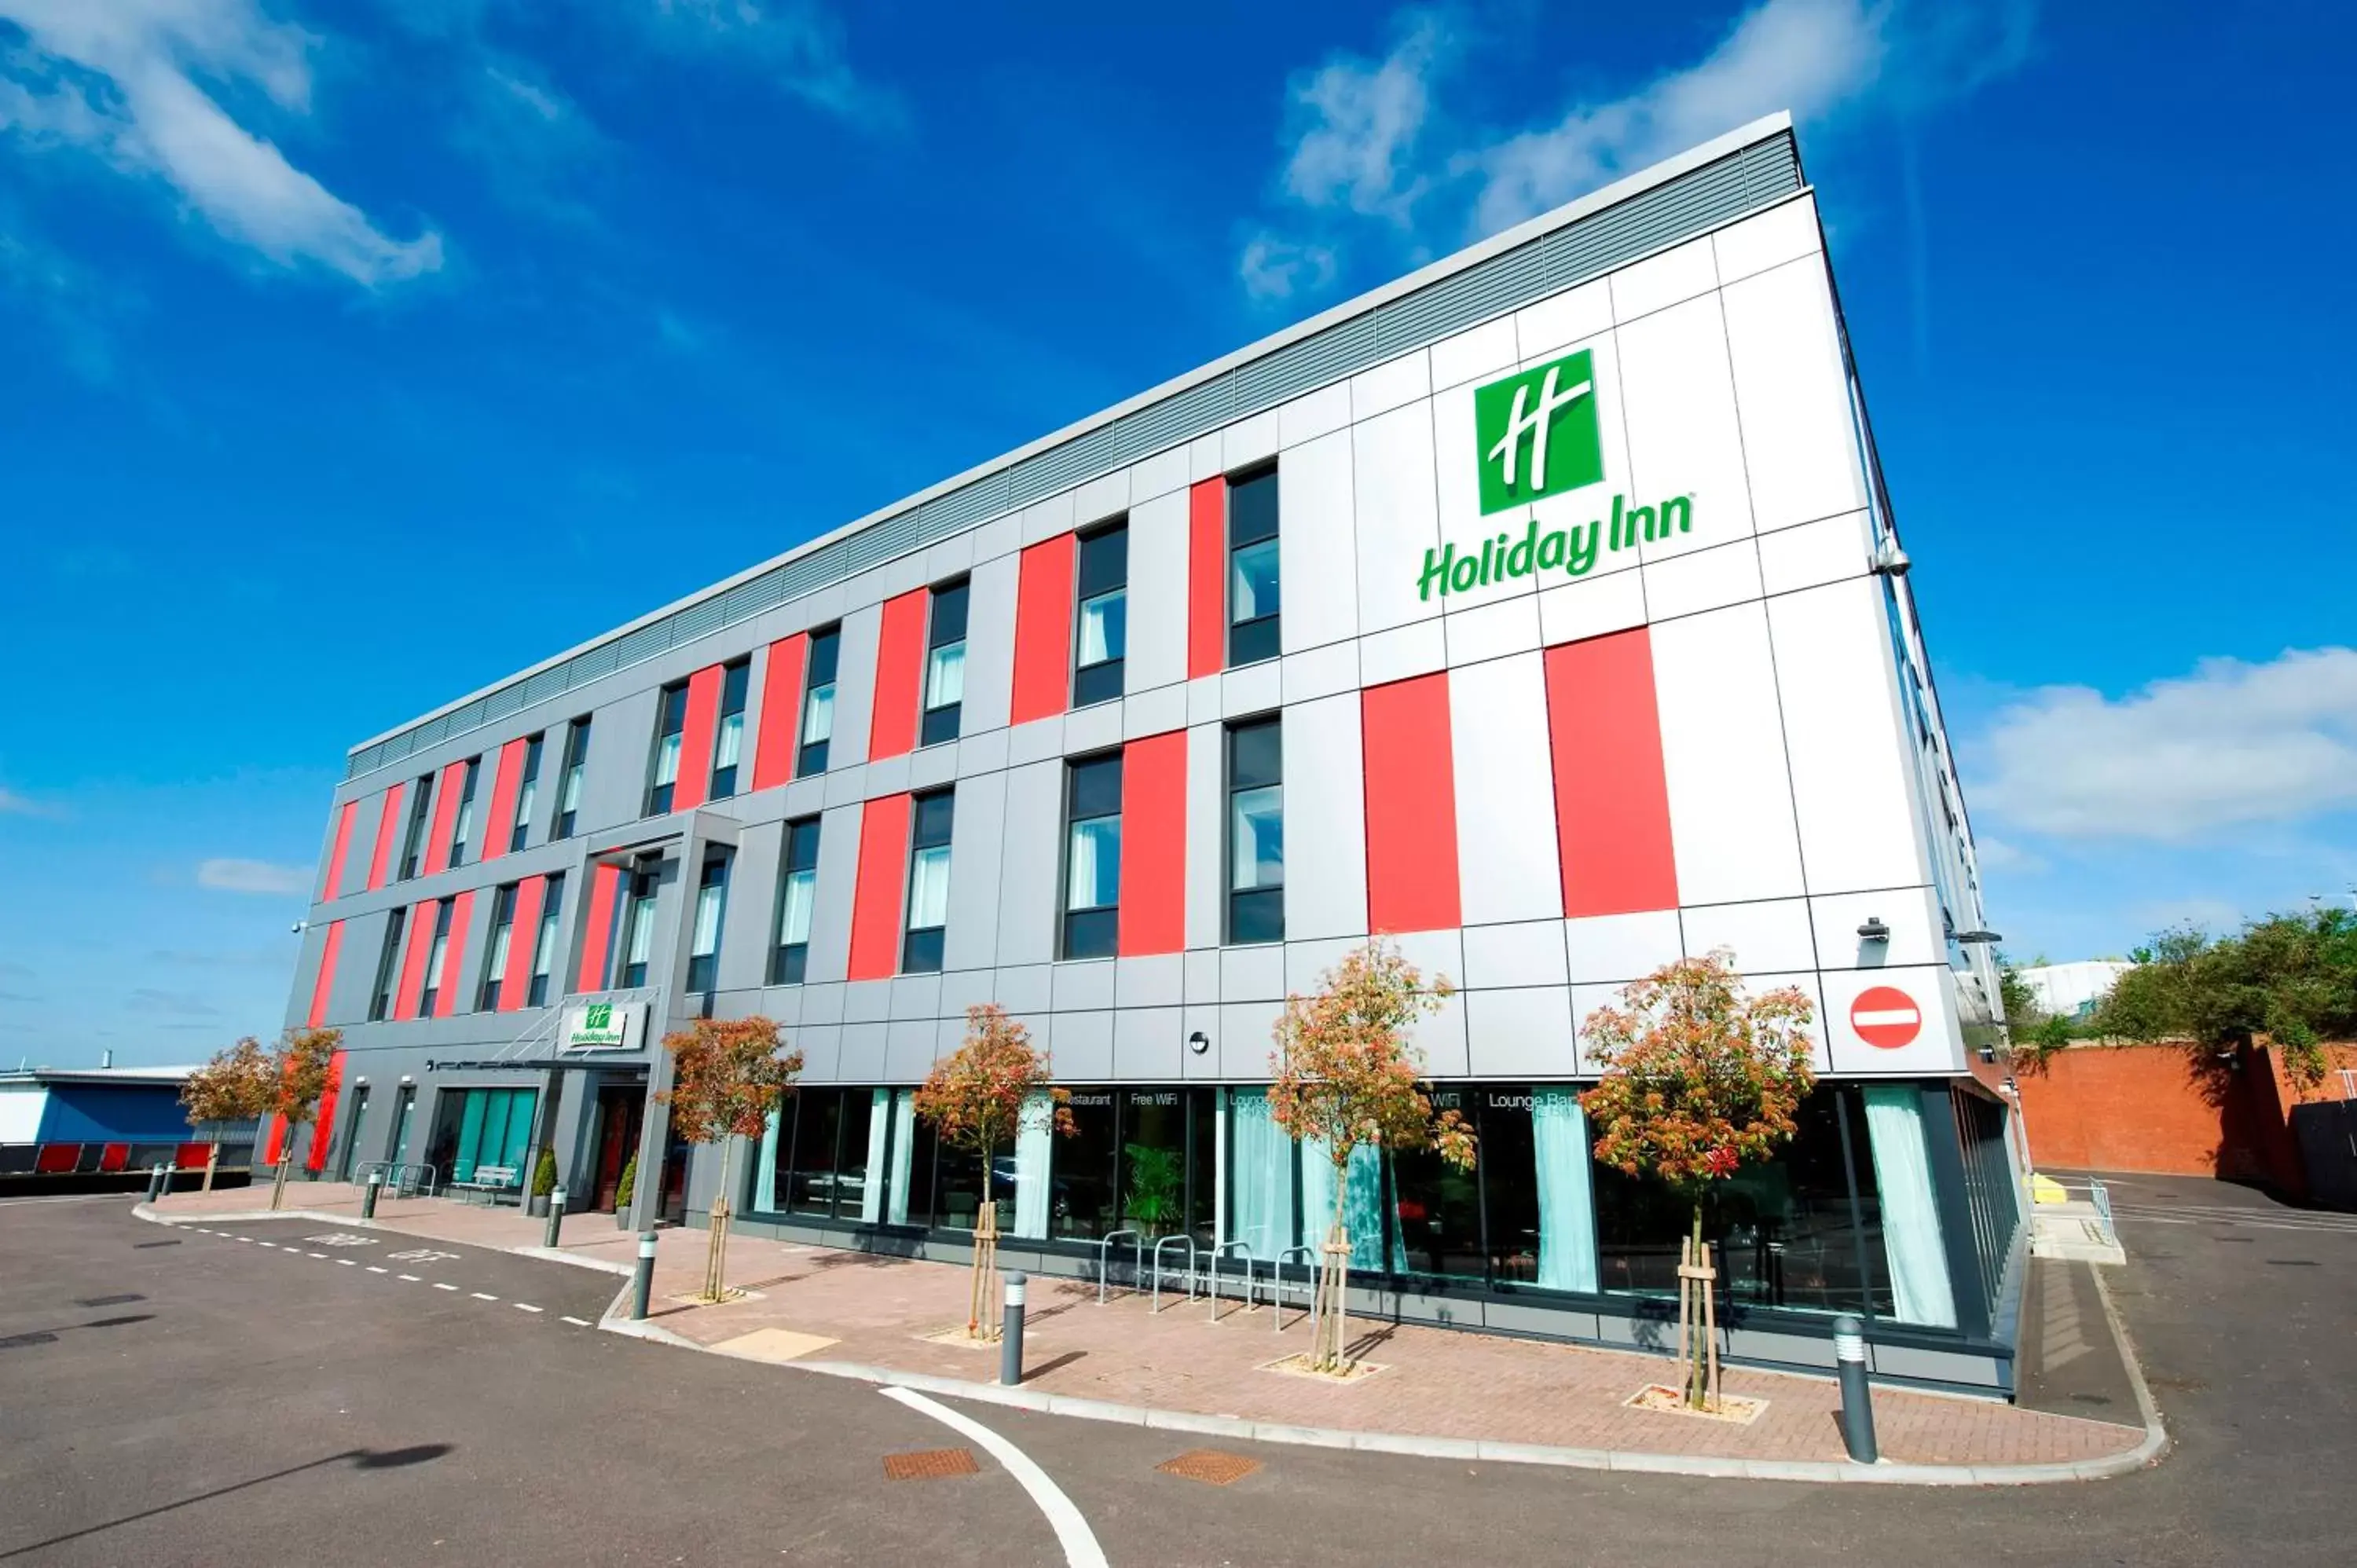 Property building in Holiday Inn London Luton Airport, an IHG Hotel